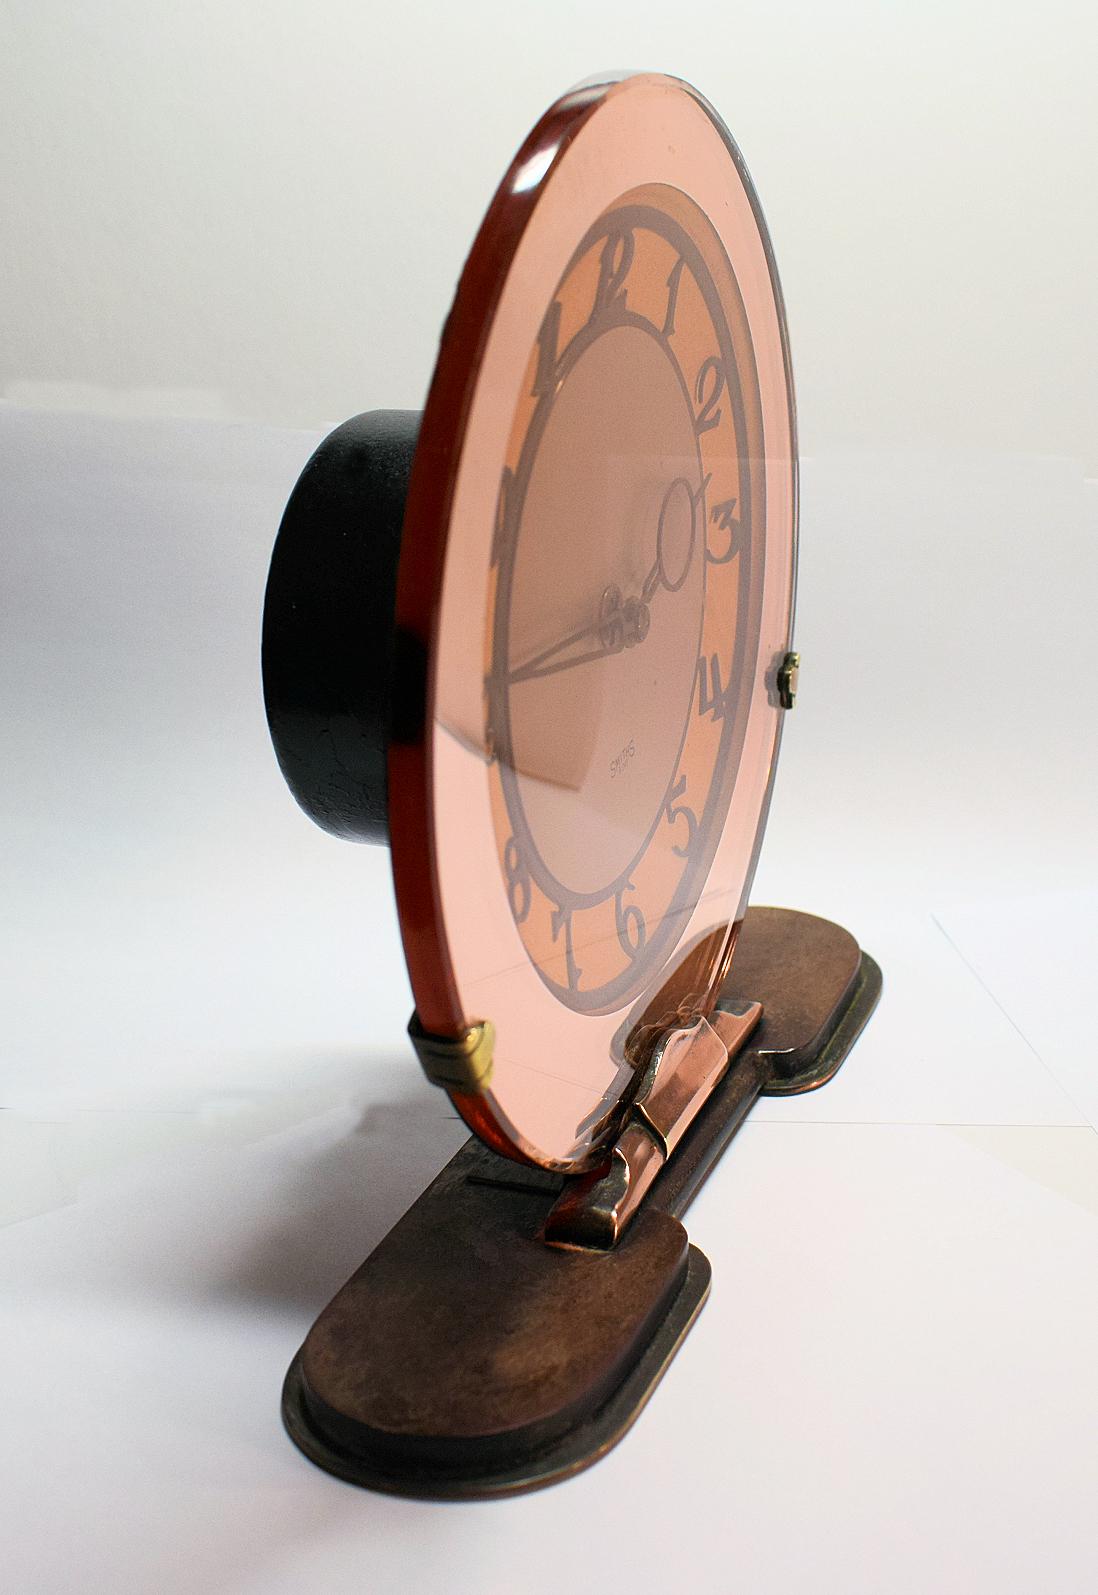 A gorgeous antique 1930s Art Deco Smiths original peach glass mirror eight day wind up mantel clock in good working condition. This clock features a peach mirrored face which is supported on a copper and black vitrolite base. We've had this clock